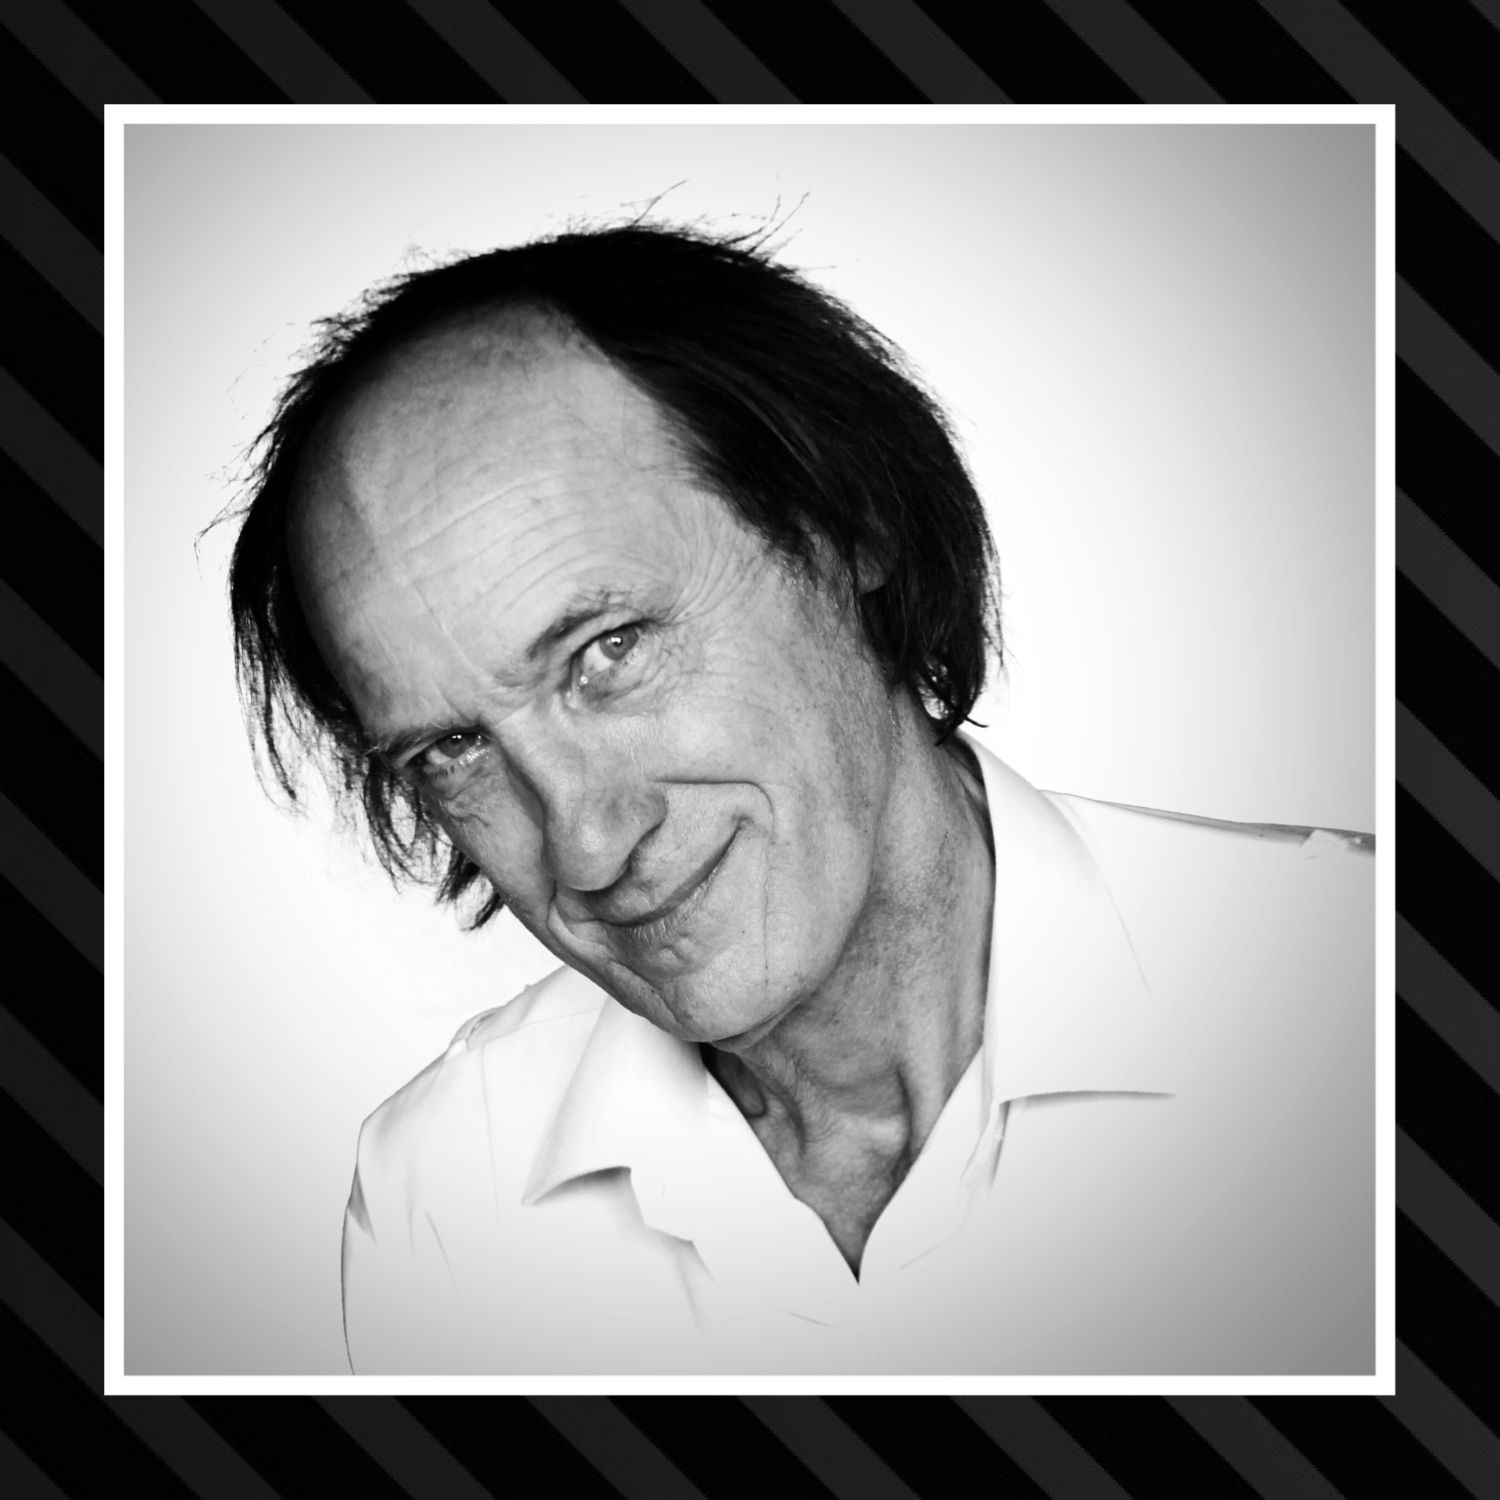 42: The one with John Otway